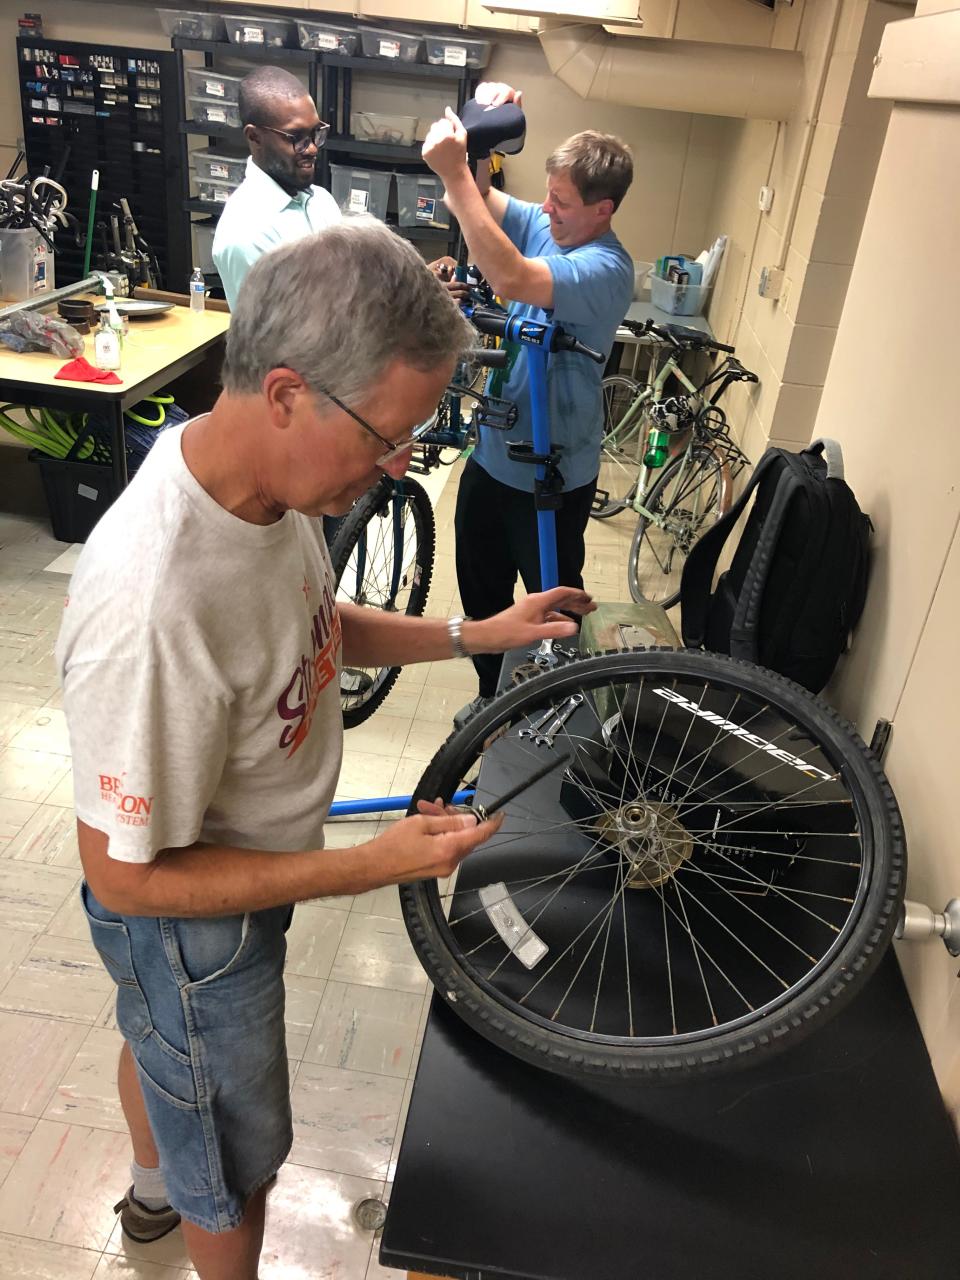 Volunteer Loren Waggy fixes a wheel downstairs at the new home of the South Bend Bike Garage on July 13, 2022.